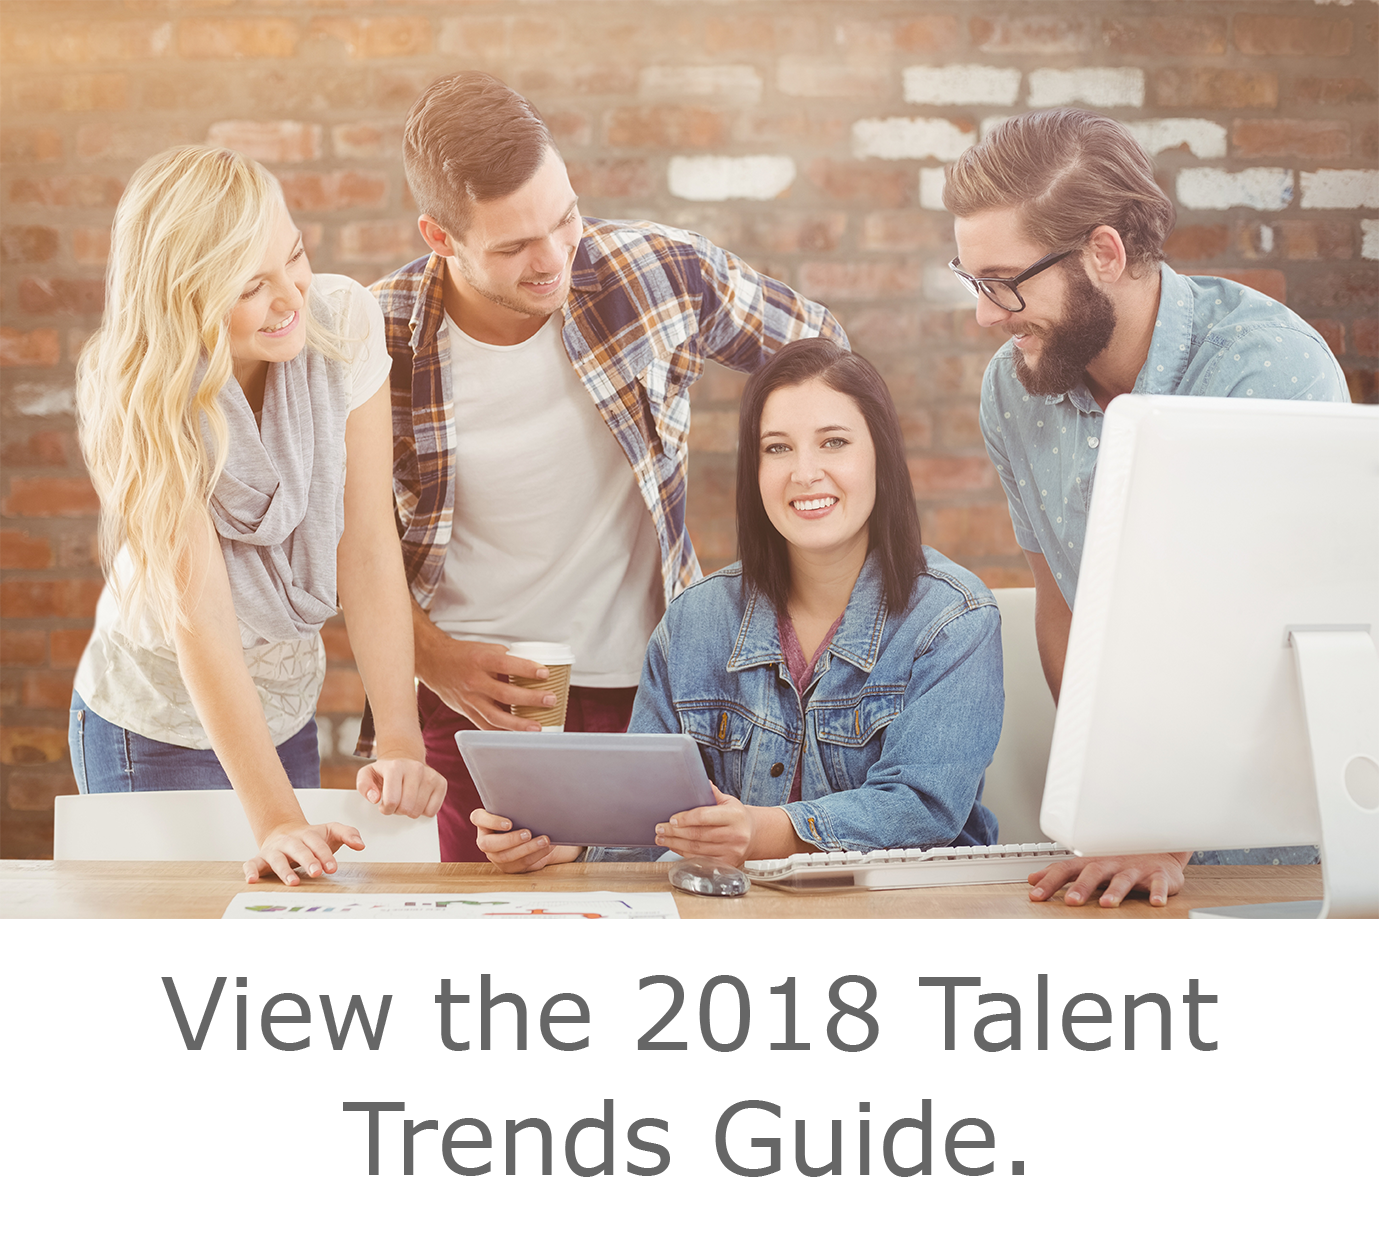 View the 2018 Talent Trends Guide